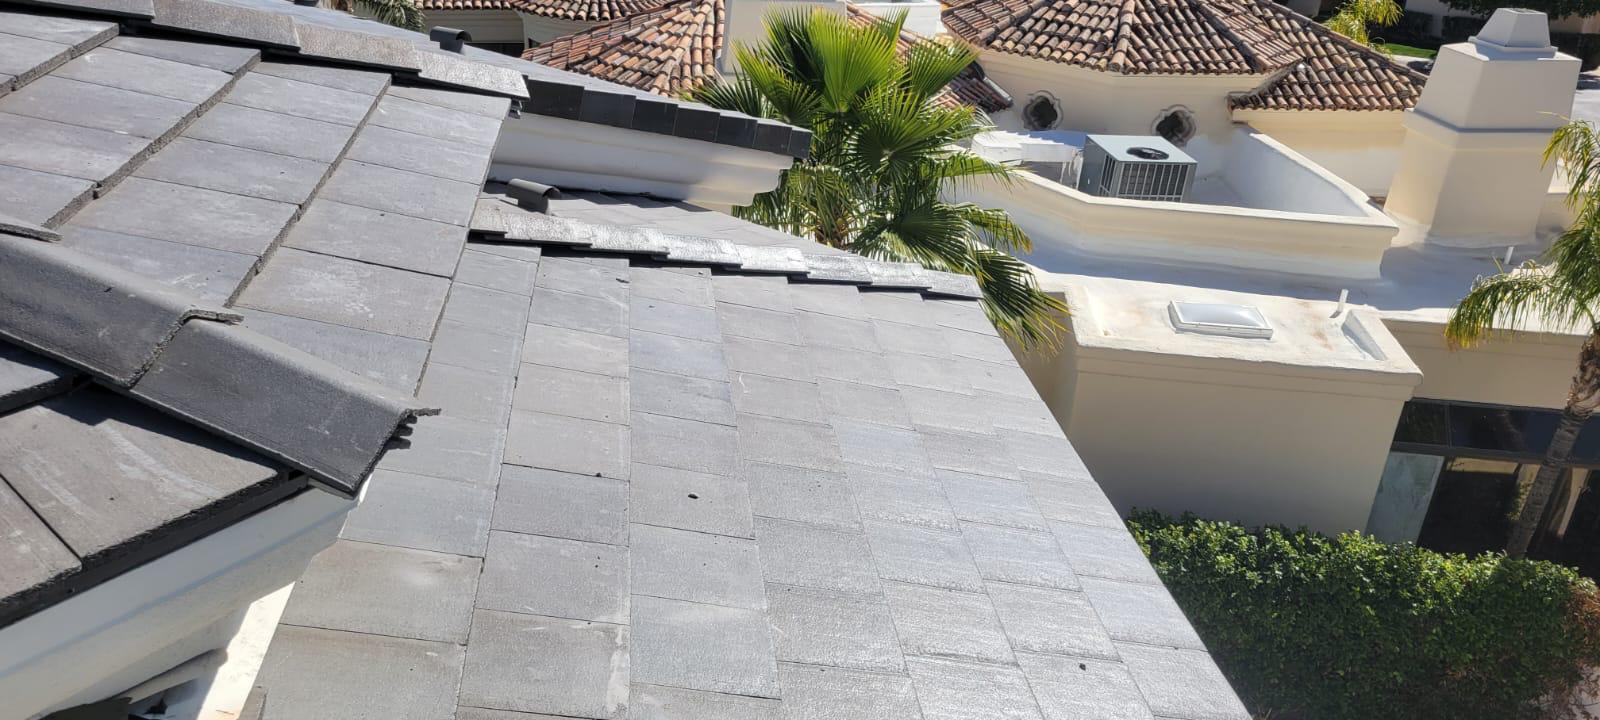 Side view of a metal tile roof in McCormick Ranch.